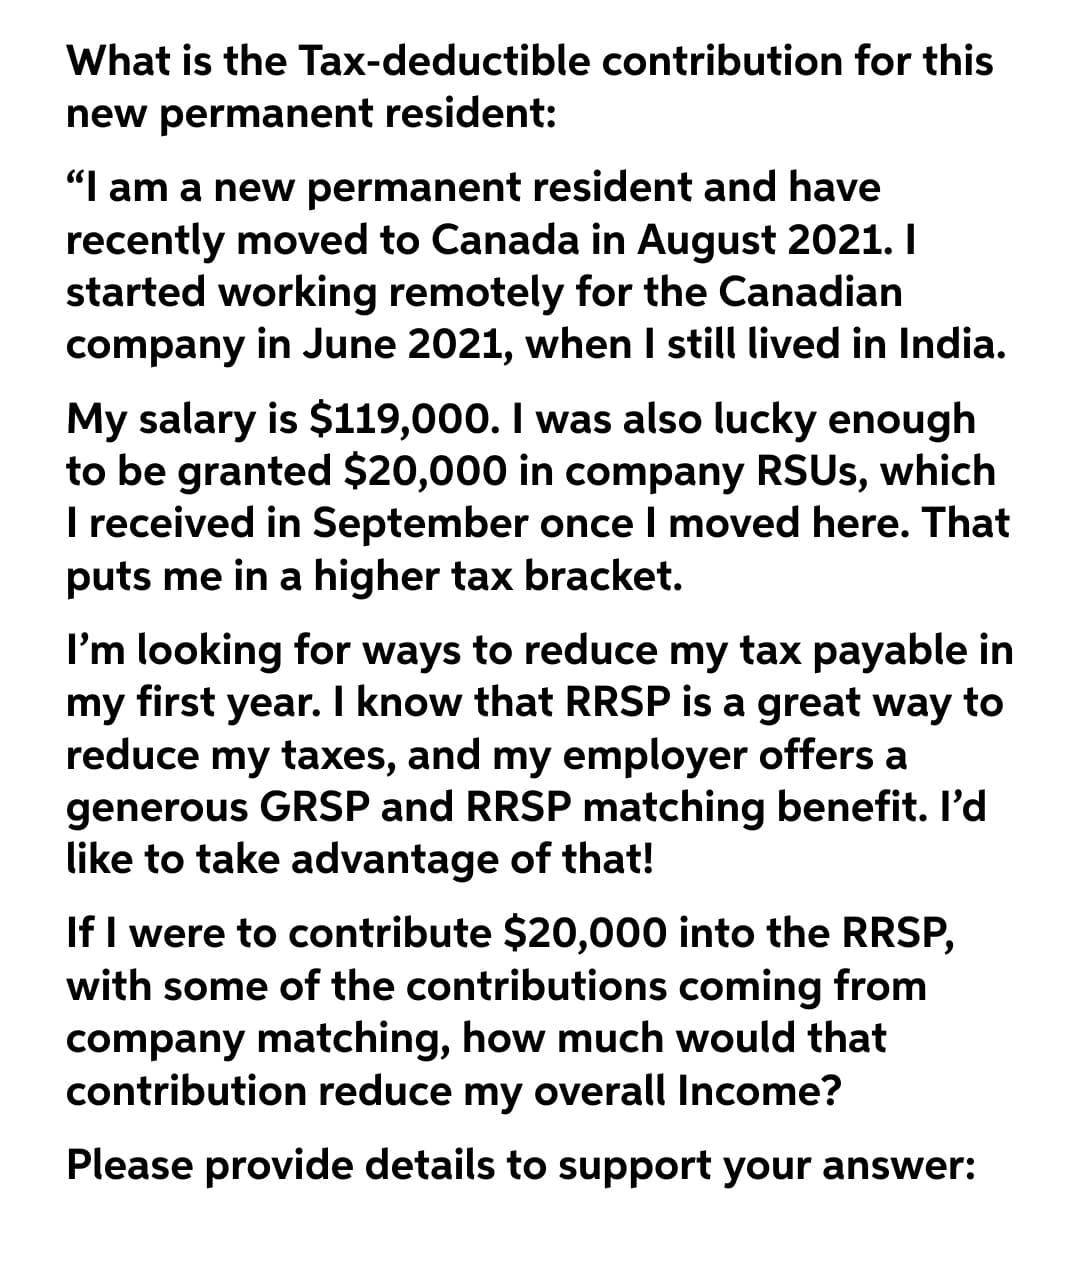 What is the Tax-deductible contribution for this
new permanent resident:
"I am a new permanent resident and have
recently moved to Canada in August 2021. I
started working remotely for the Canadian
company in June 2021, when I still lived in India.
My salary is $119,000. I was also lucky enough
to be granted $20,000 in company RSUS, which
I received in September once I moved here. That
puts me in a higher tax bracket.
I'm looking for ways to reduce my tax payable in
my first year. I know that RRSP is a great way to
reduce my taxes, and my employer offers a
generous GRSP and RRSP matching benefit. l'd
like to take advantage of that!
If I were to contribute $20,000 into the RRSP,
with some of the contributions coming from
company matching, how much would that
contribution reduce my overall Income?
Please provide details to support your answer:
